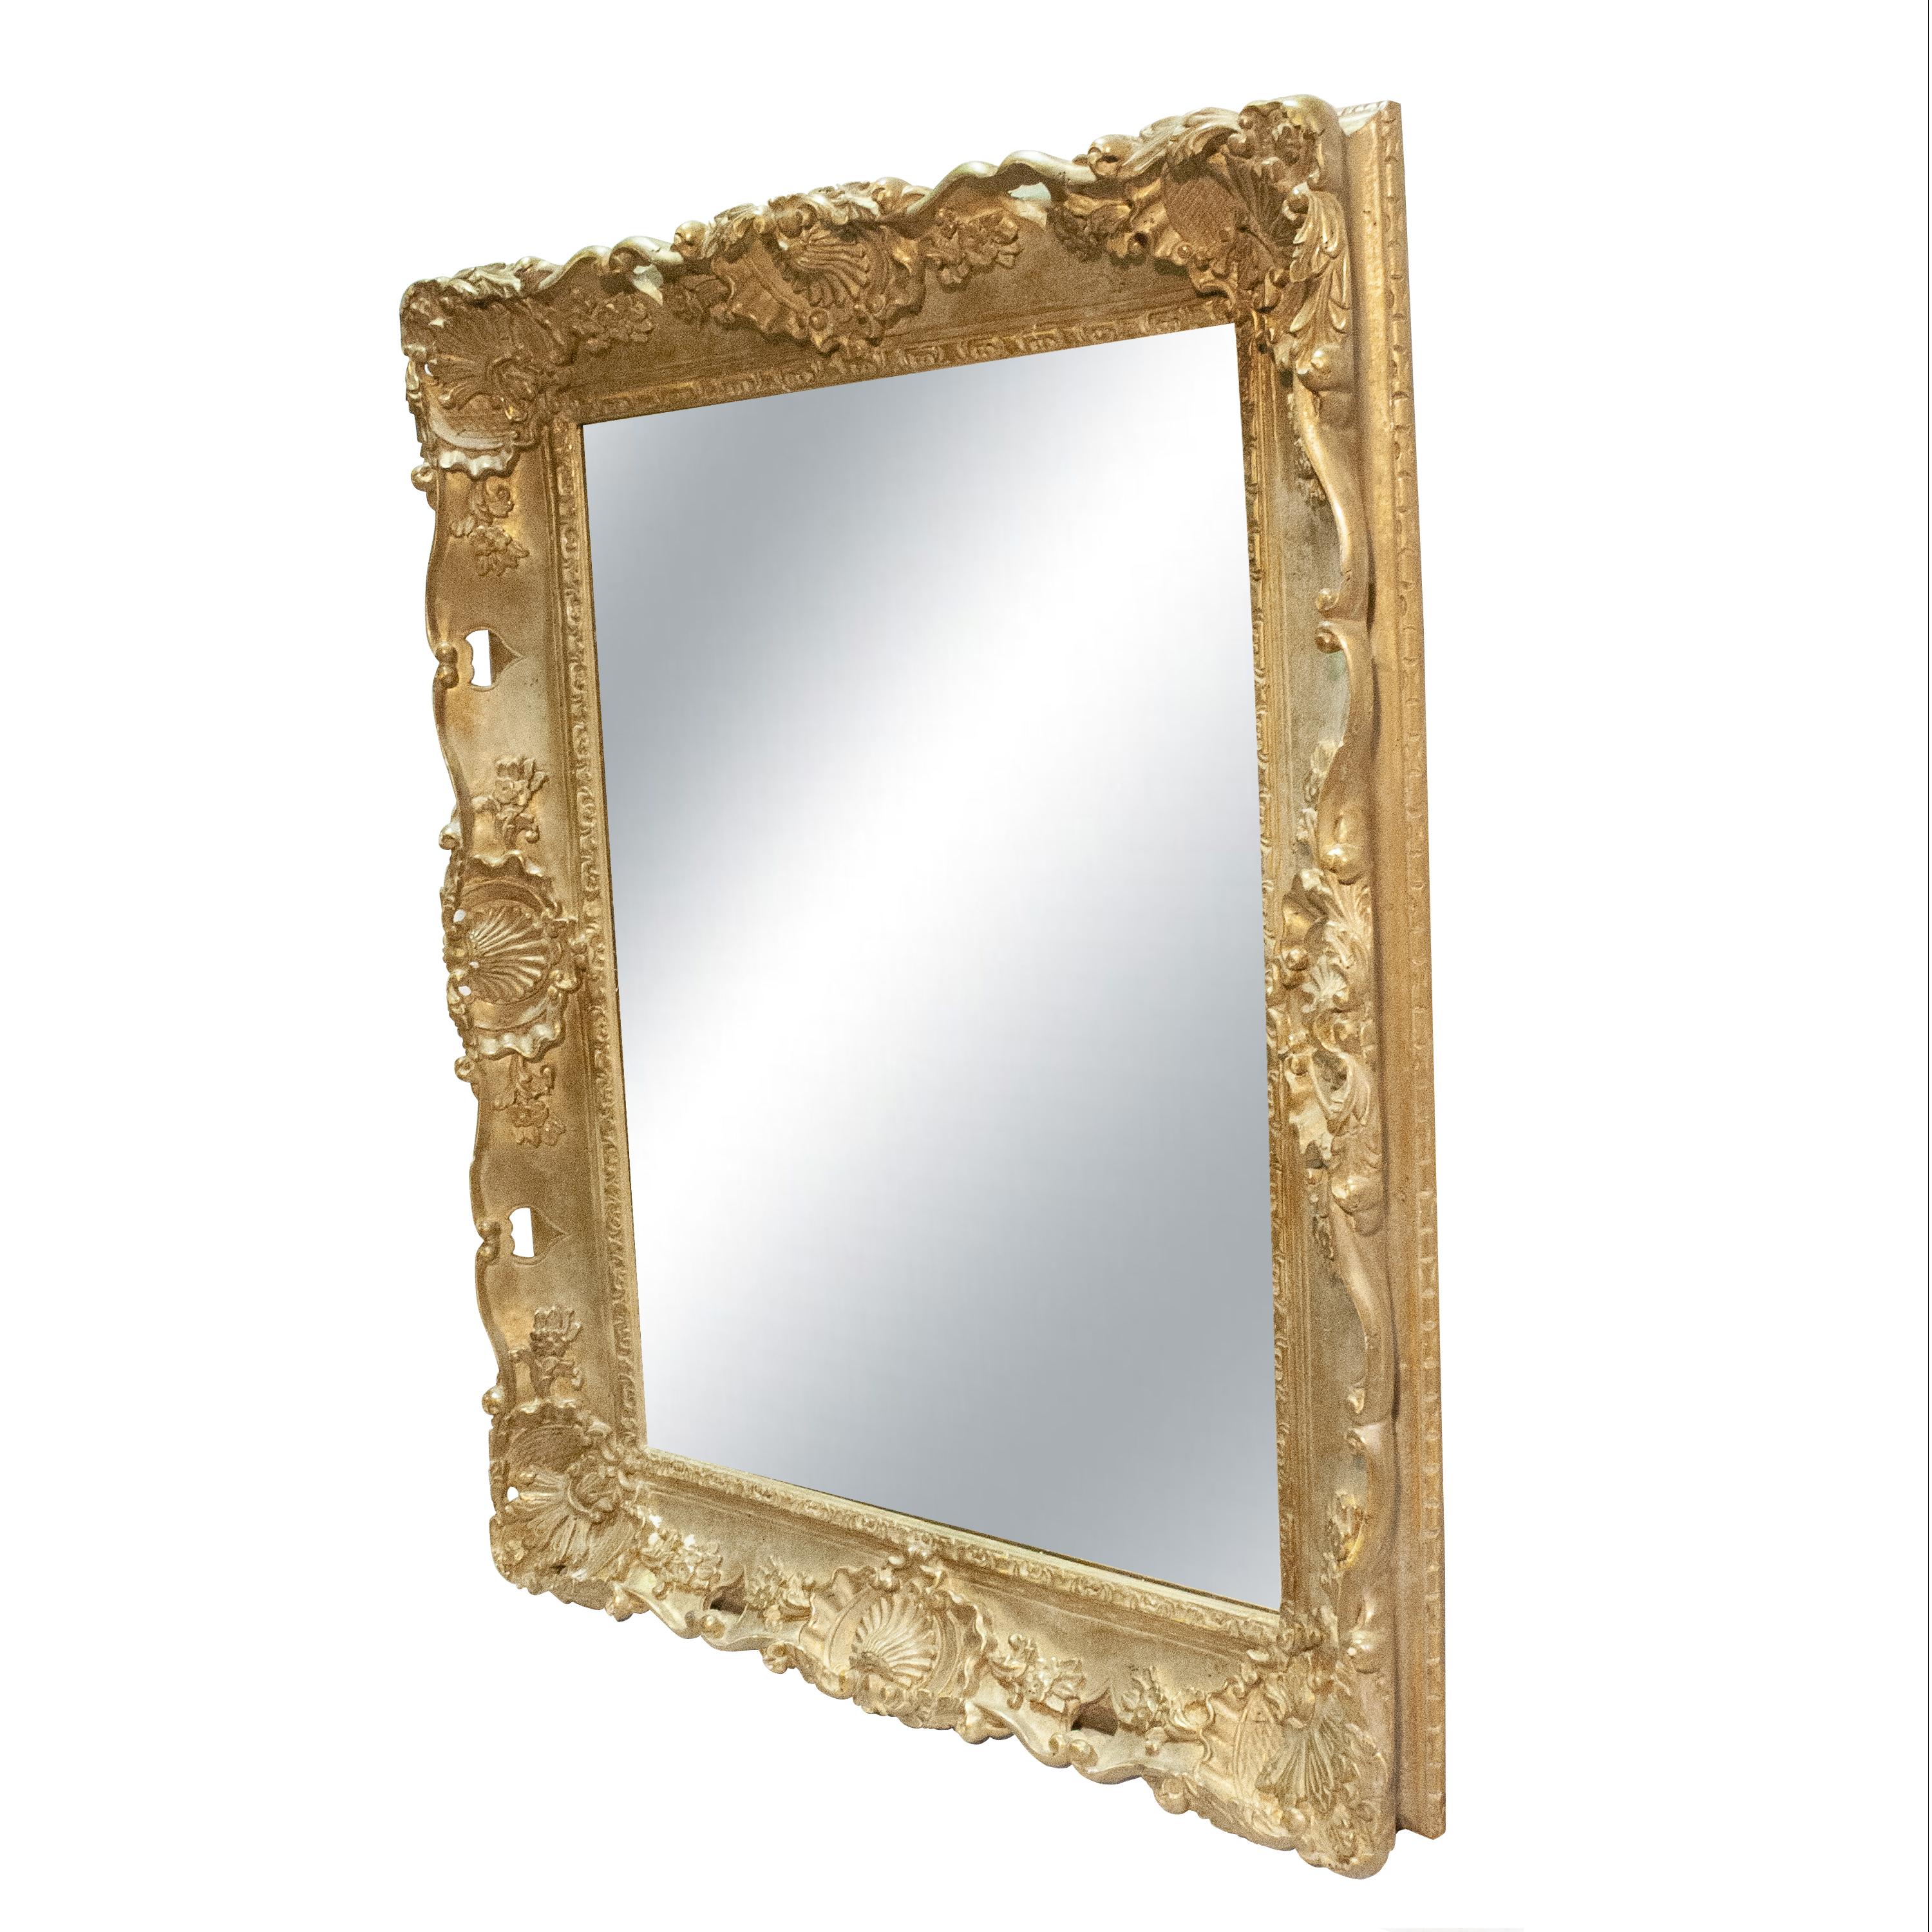 Late 20th Century Regency Rectangular Handcrafted Gold Foil Wood Mirror Spain, 1970 For Sale